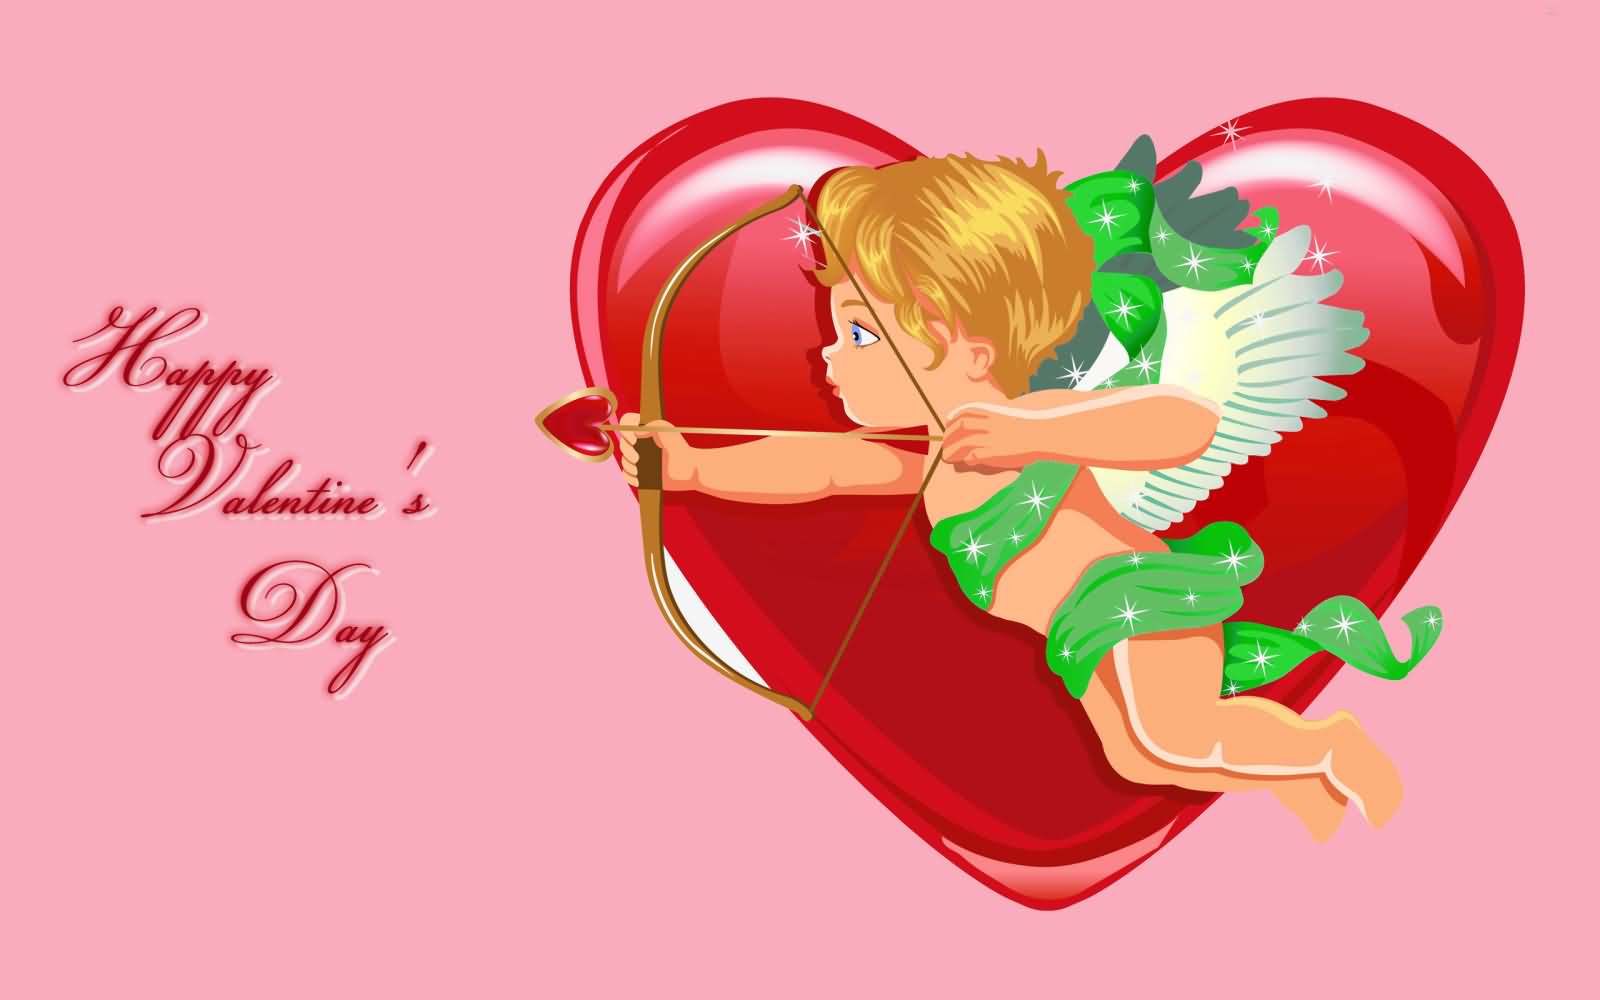 Sweet cupid shooting your heart Happy Valentines Day wishes